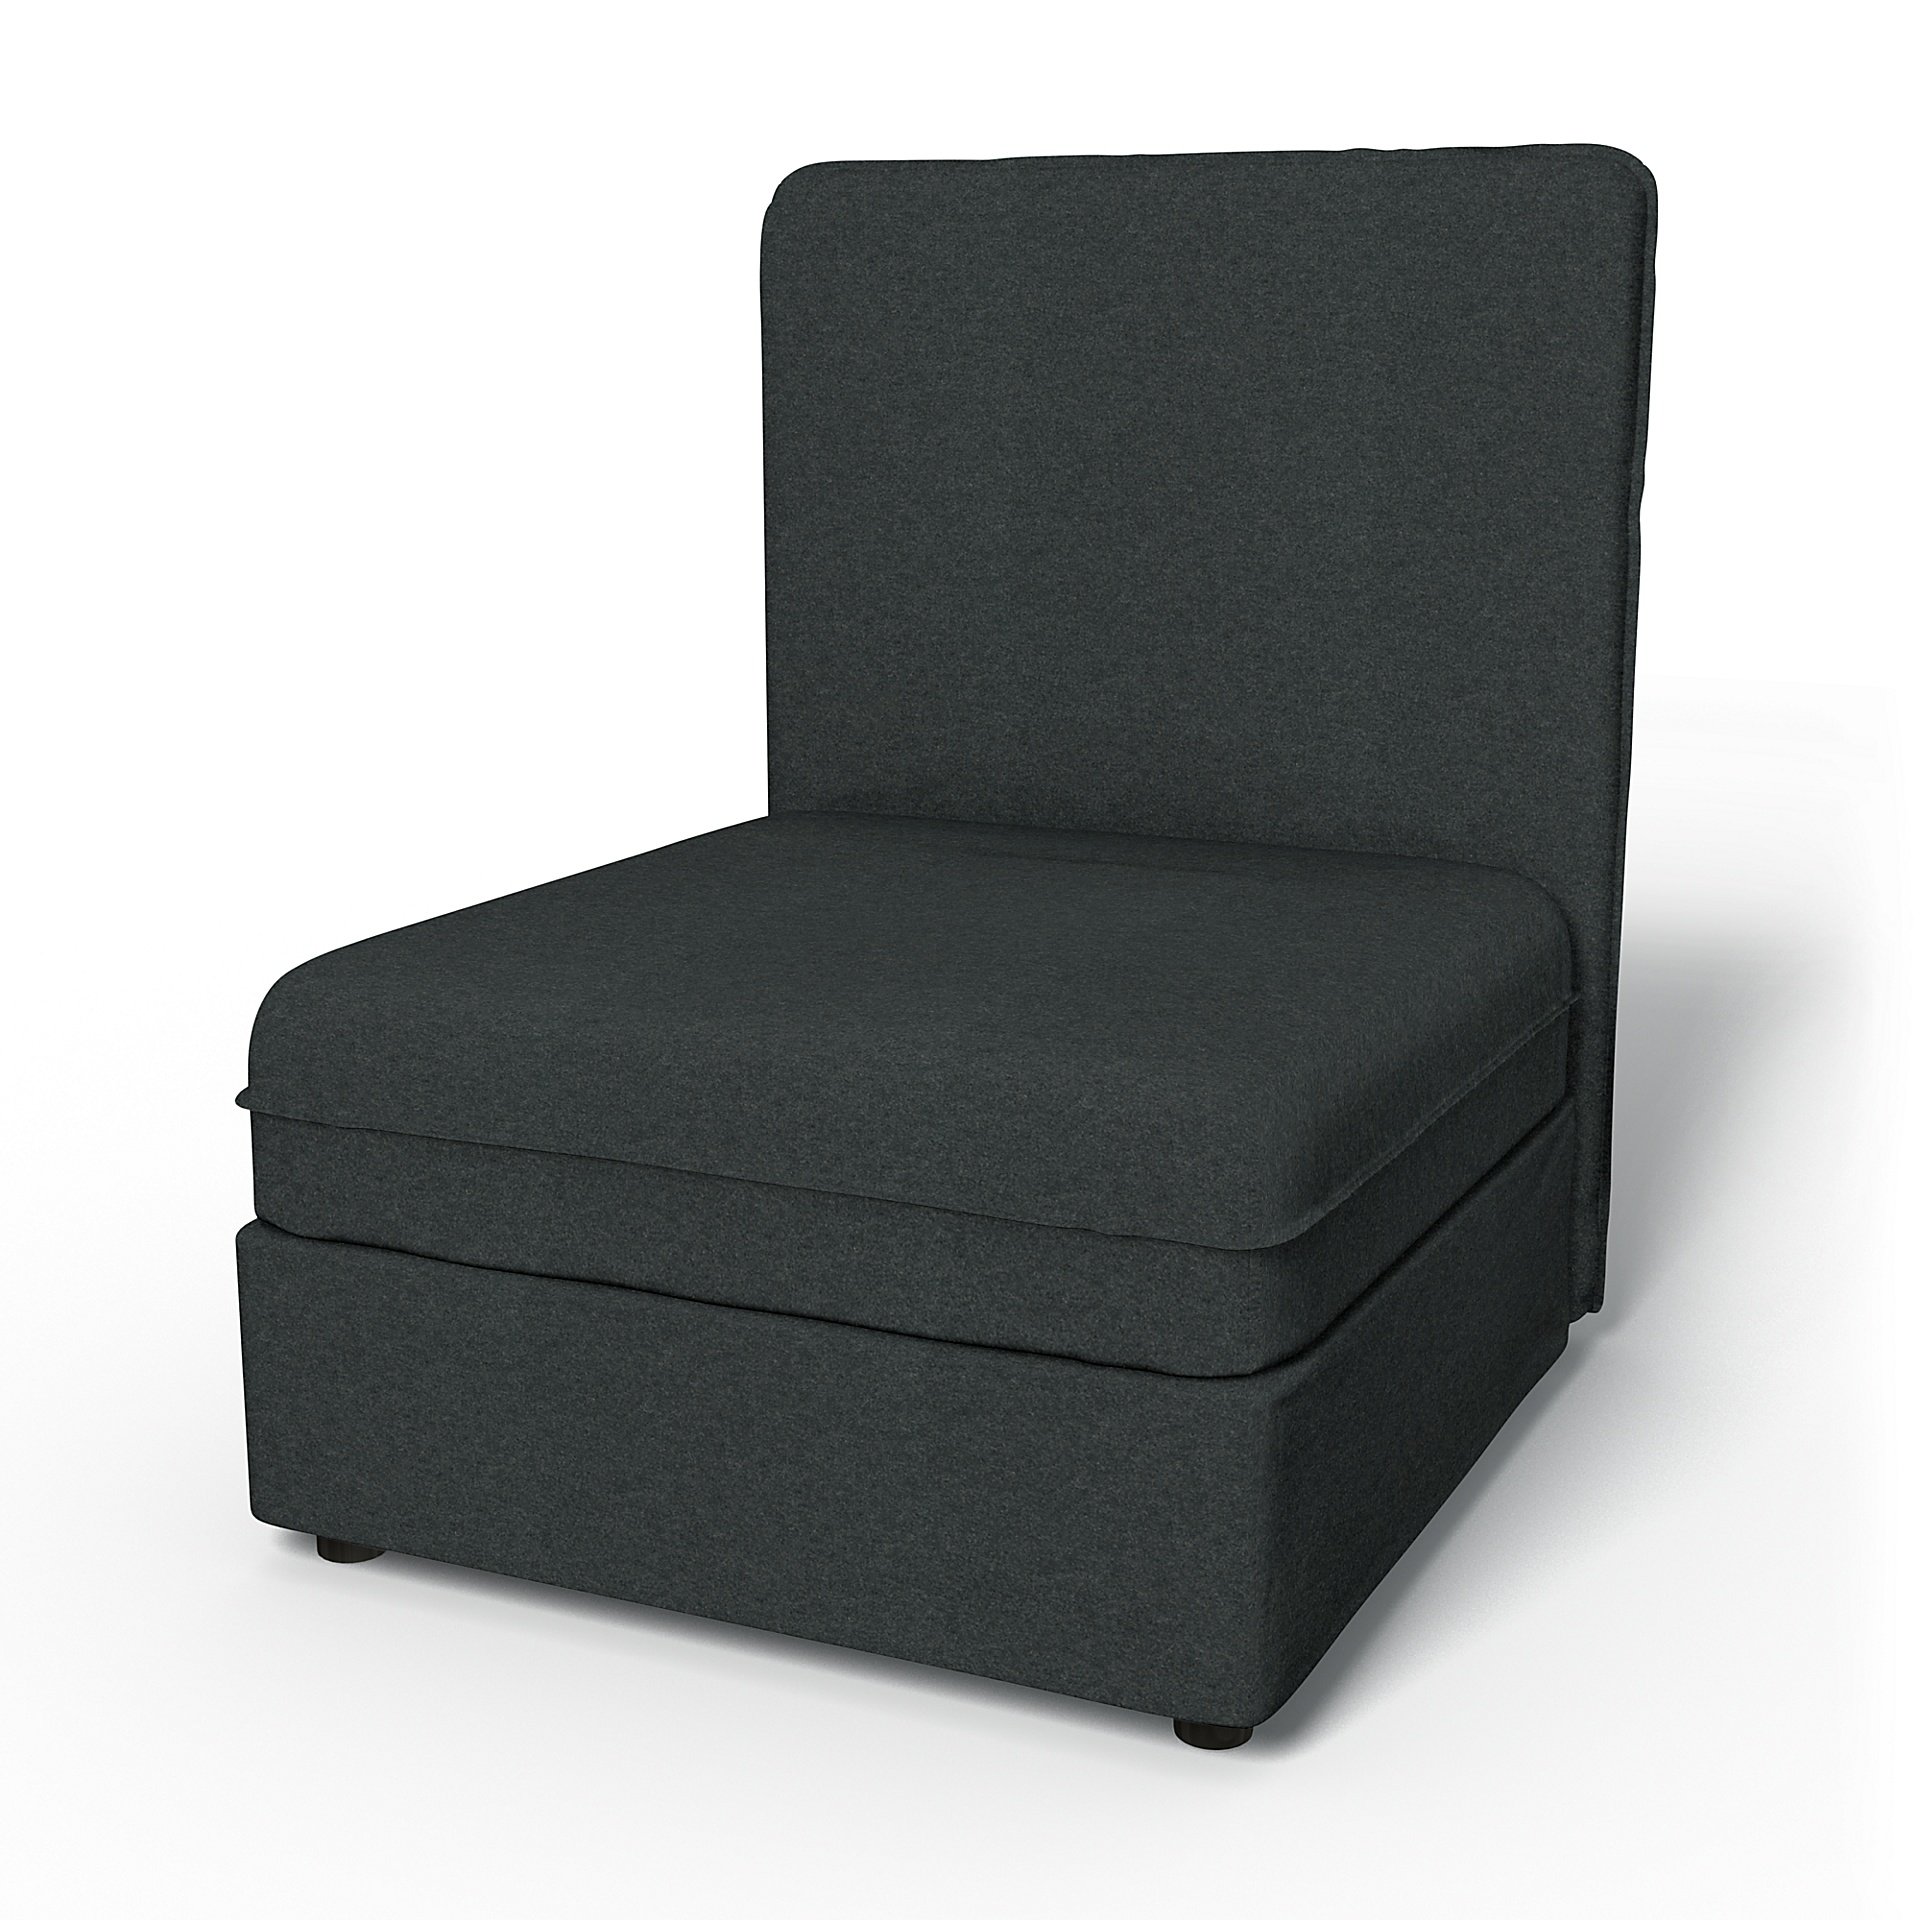 IKEA - Vallentuna Seat Module with High Back and Storage Cover 80x100cm 32x39in, Stone, Wool - Bemz